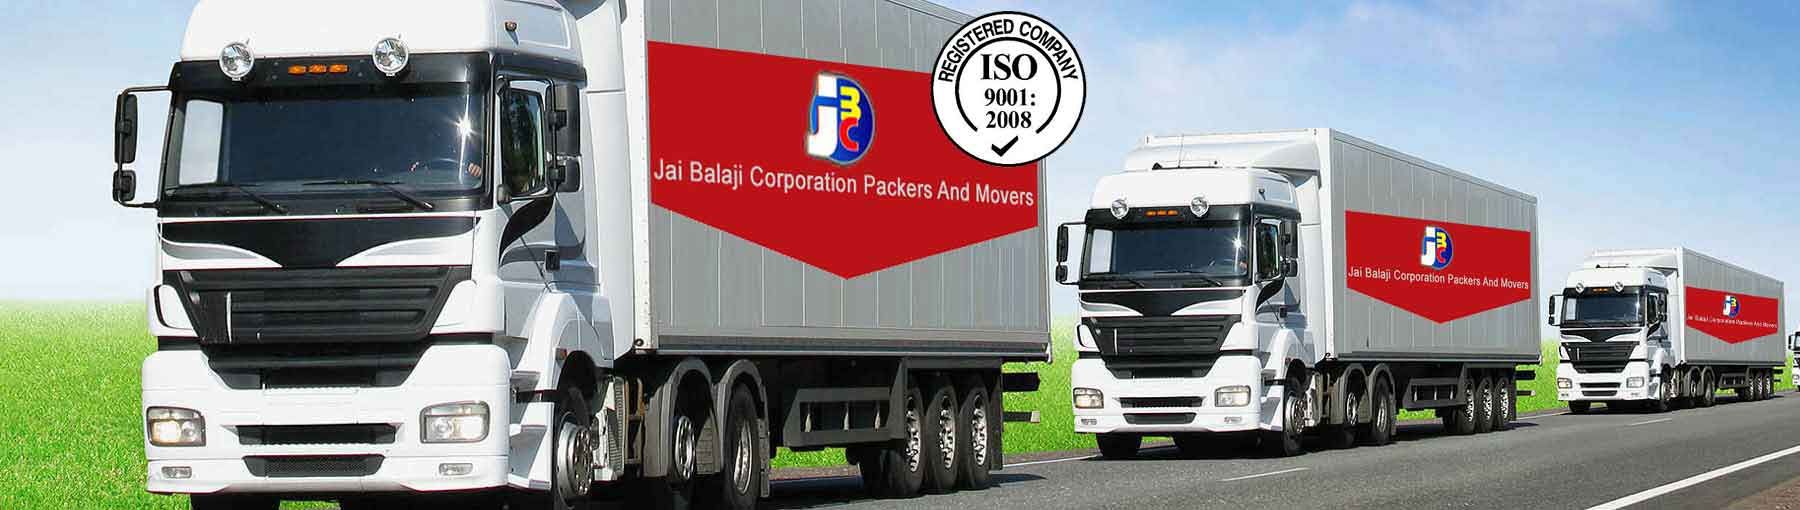 JBC Packers And Movers Call @  9301325030 - Packers and Movers Durg.